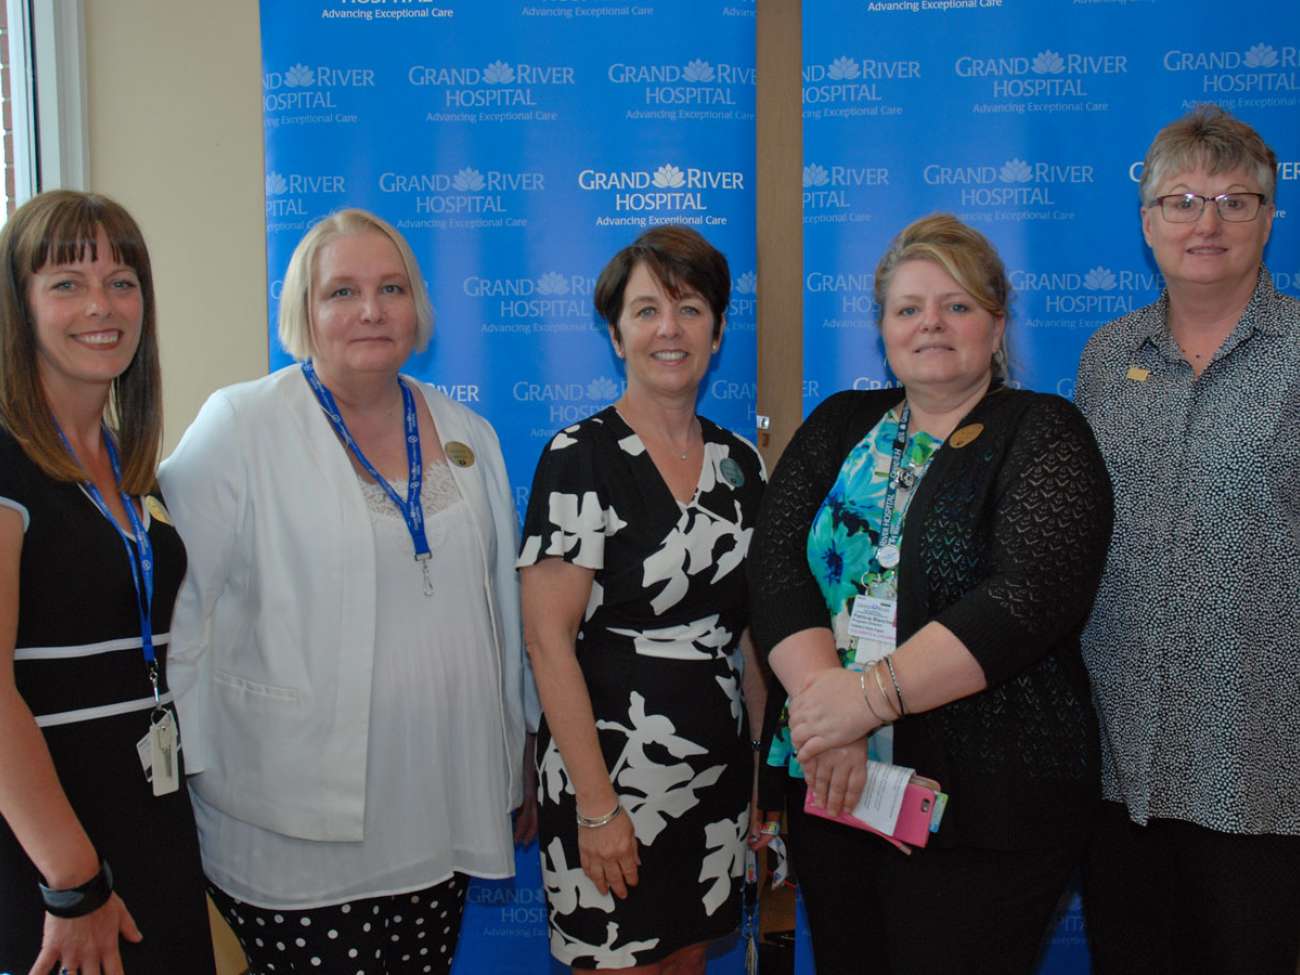 Kelly and Justine spoke at GRH's best practices expo, along with the hospital's chief nursing executive Judy Linton, director of integrated professional practice Patricia Blancher and Margaret Boyle from the RNAO's Waterloo chapter.